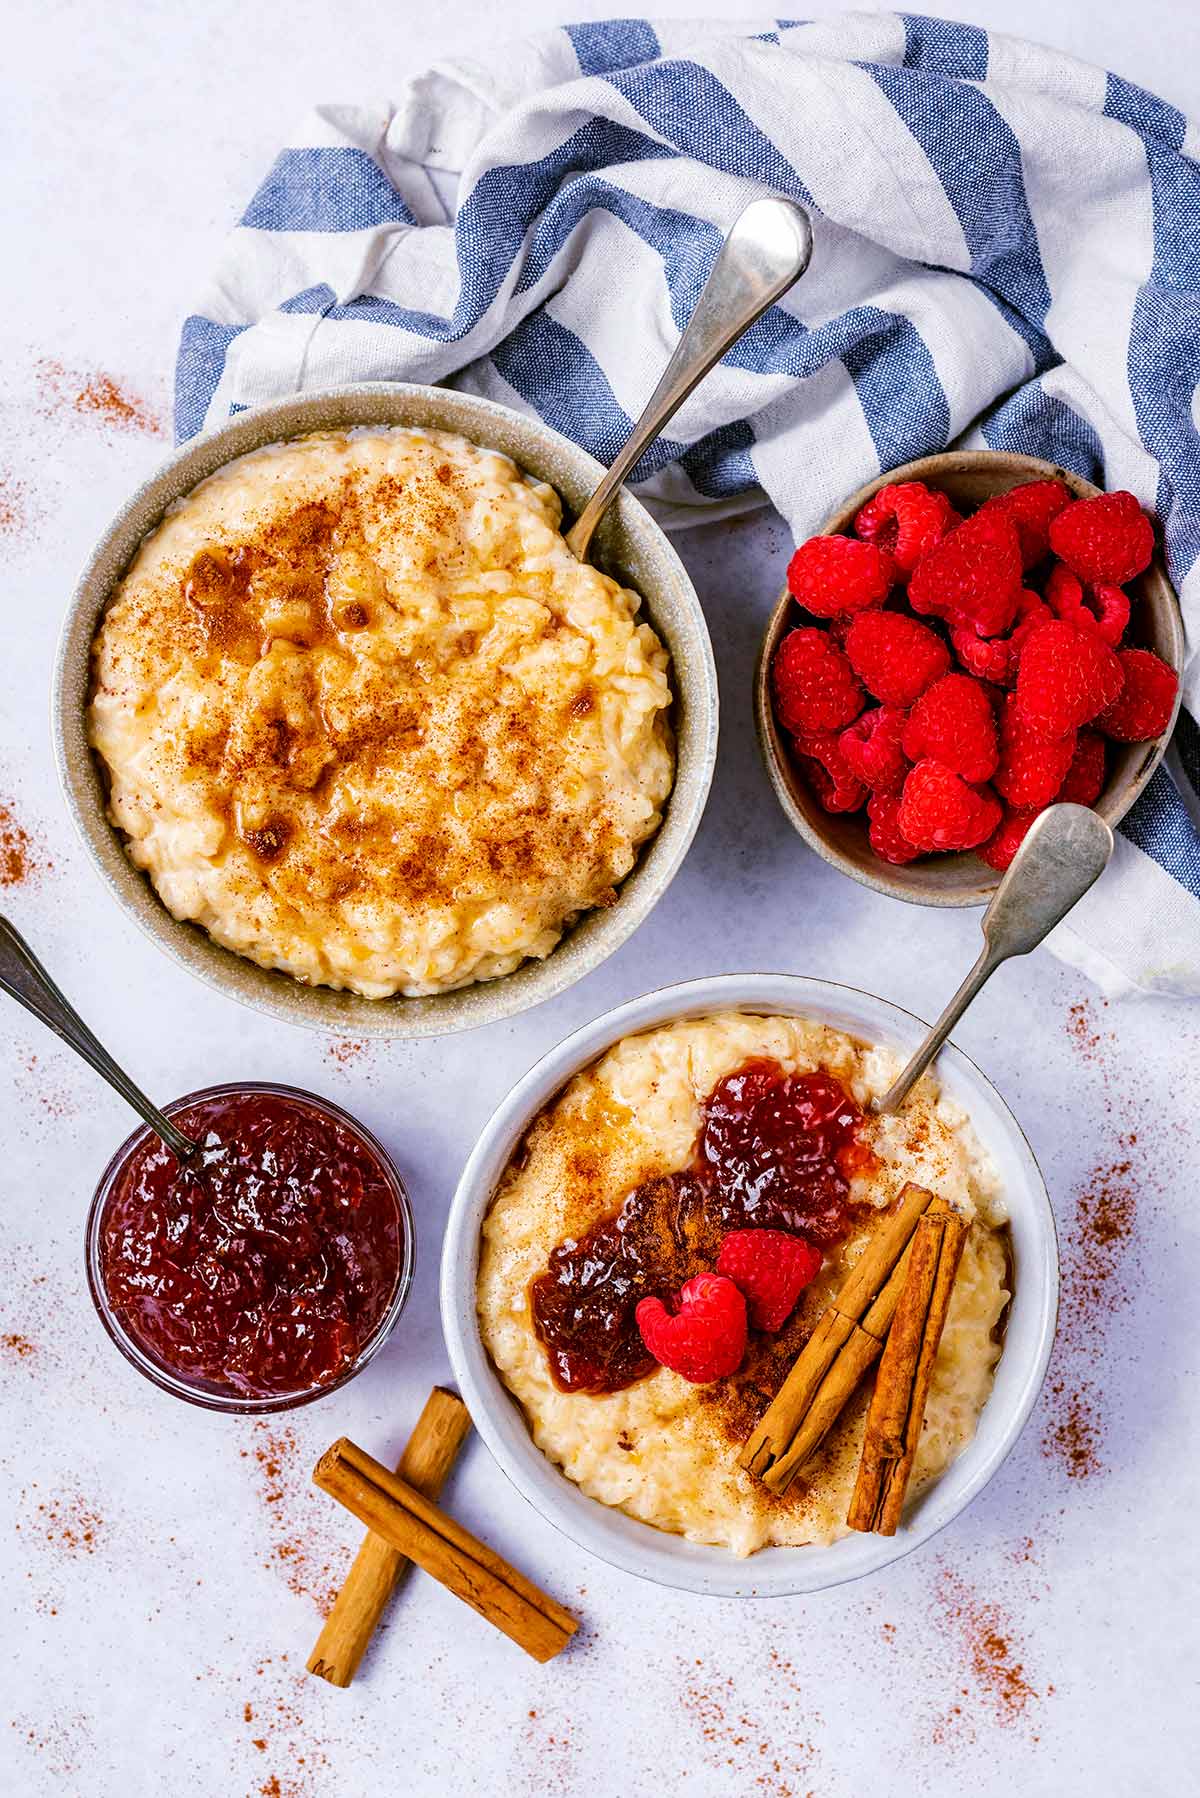 Two bowls of rice pudding one topped with cinnamon, one topped with jam.